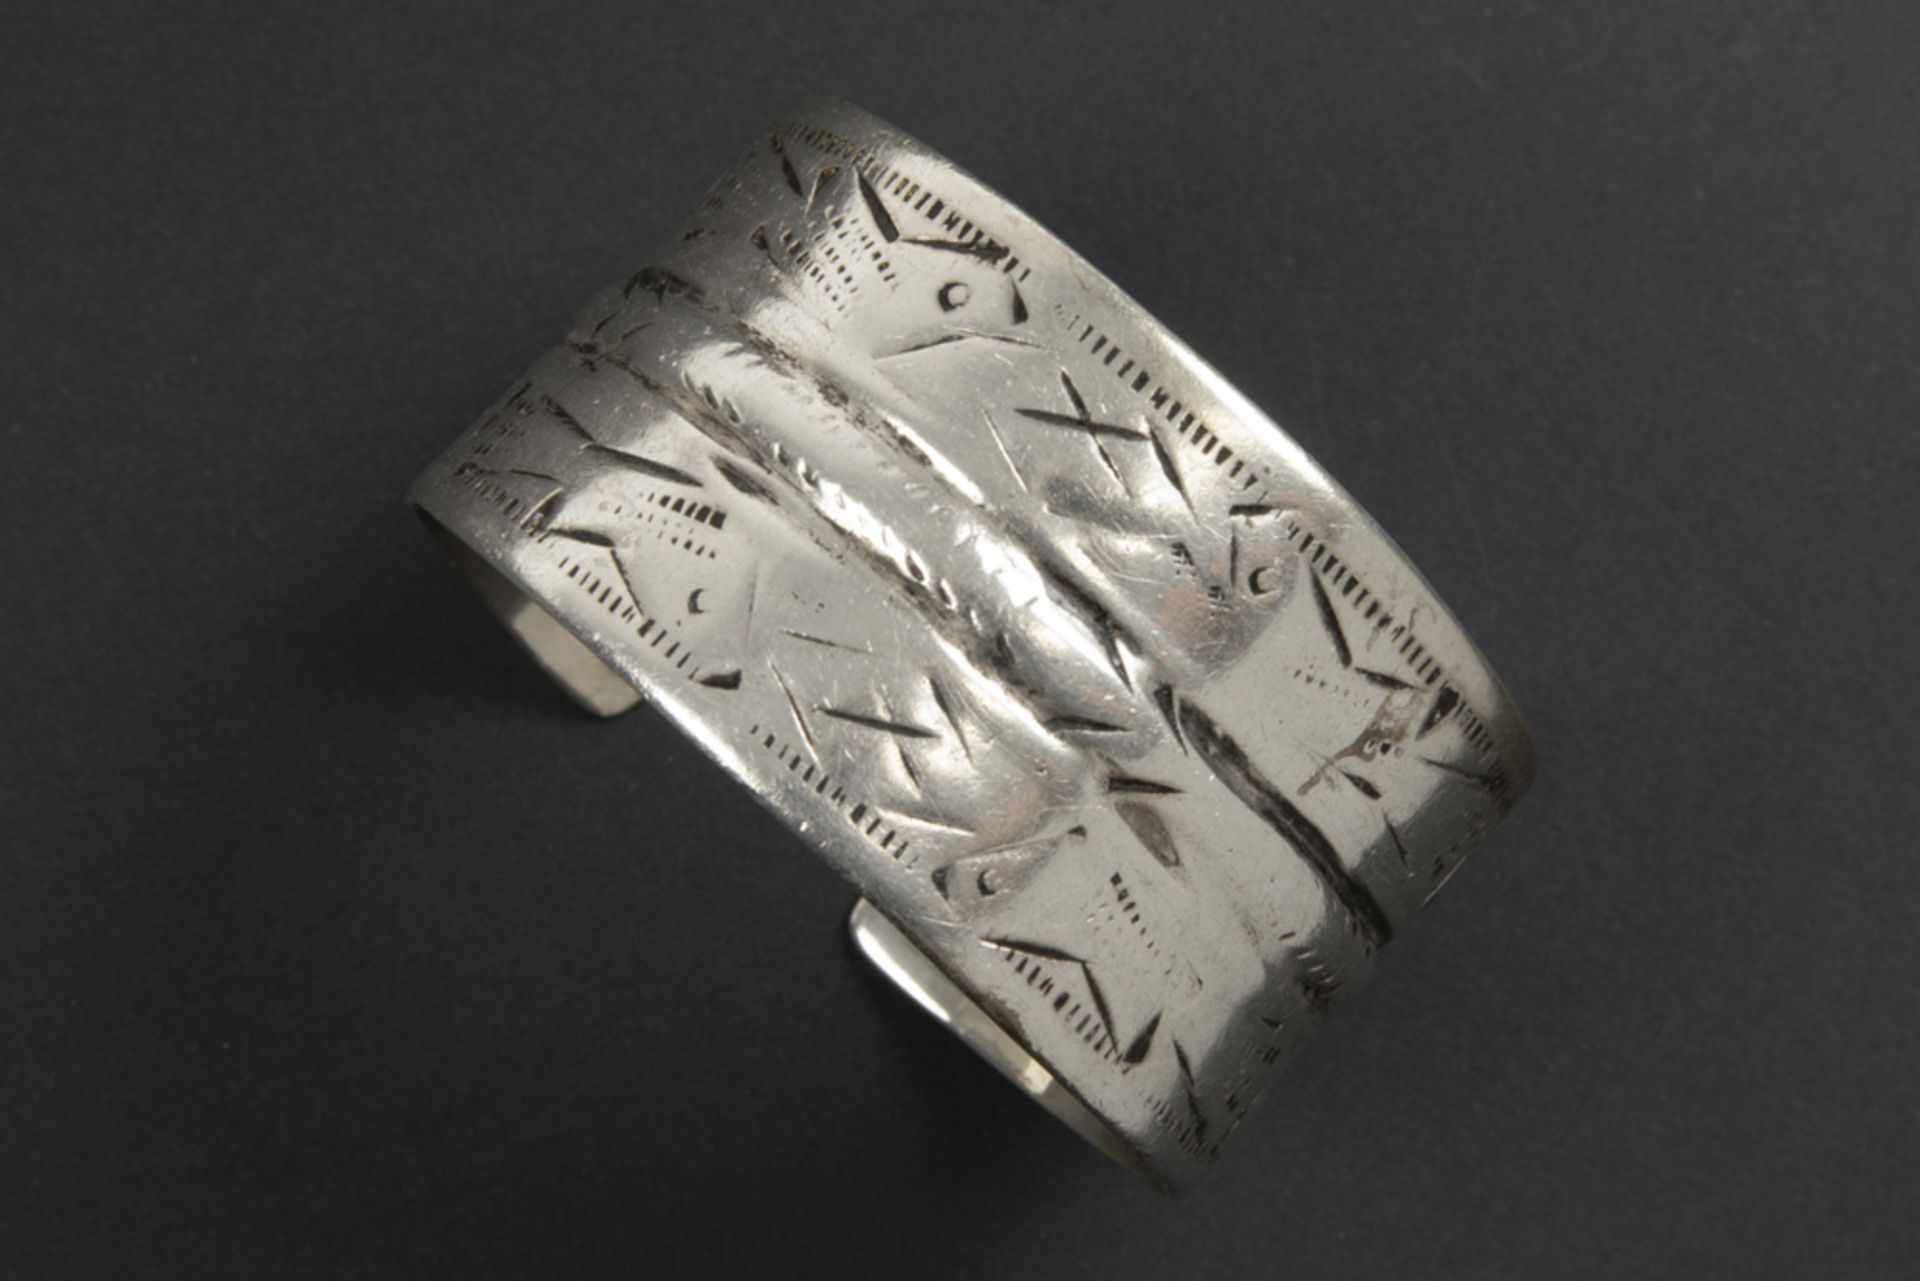 old ethnic bracelet from Tunesia in silver with engraved motifs || Oude etnische bracelet uit